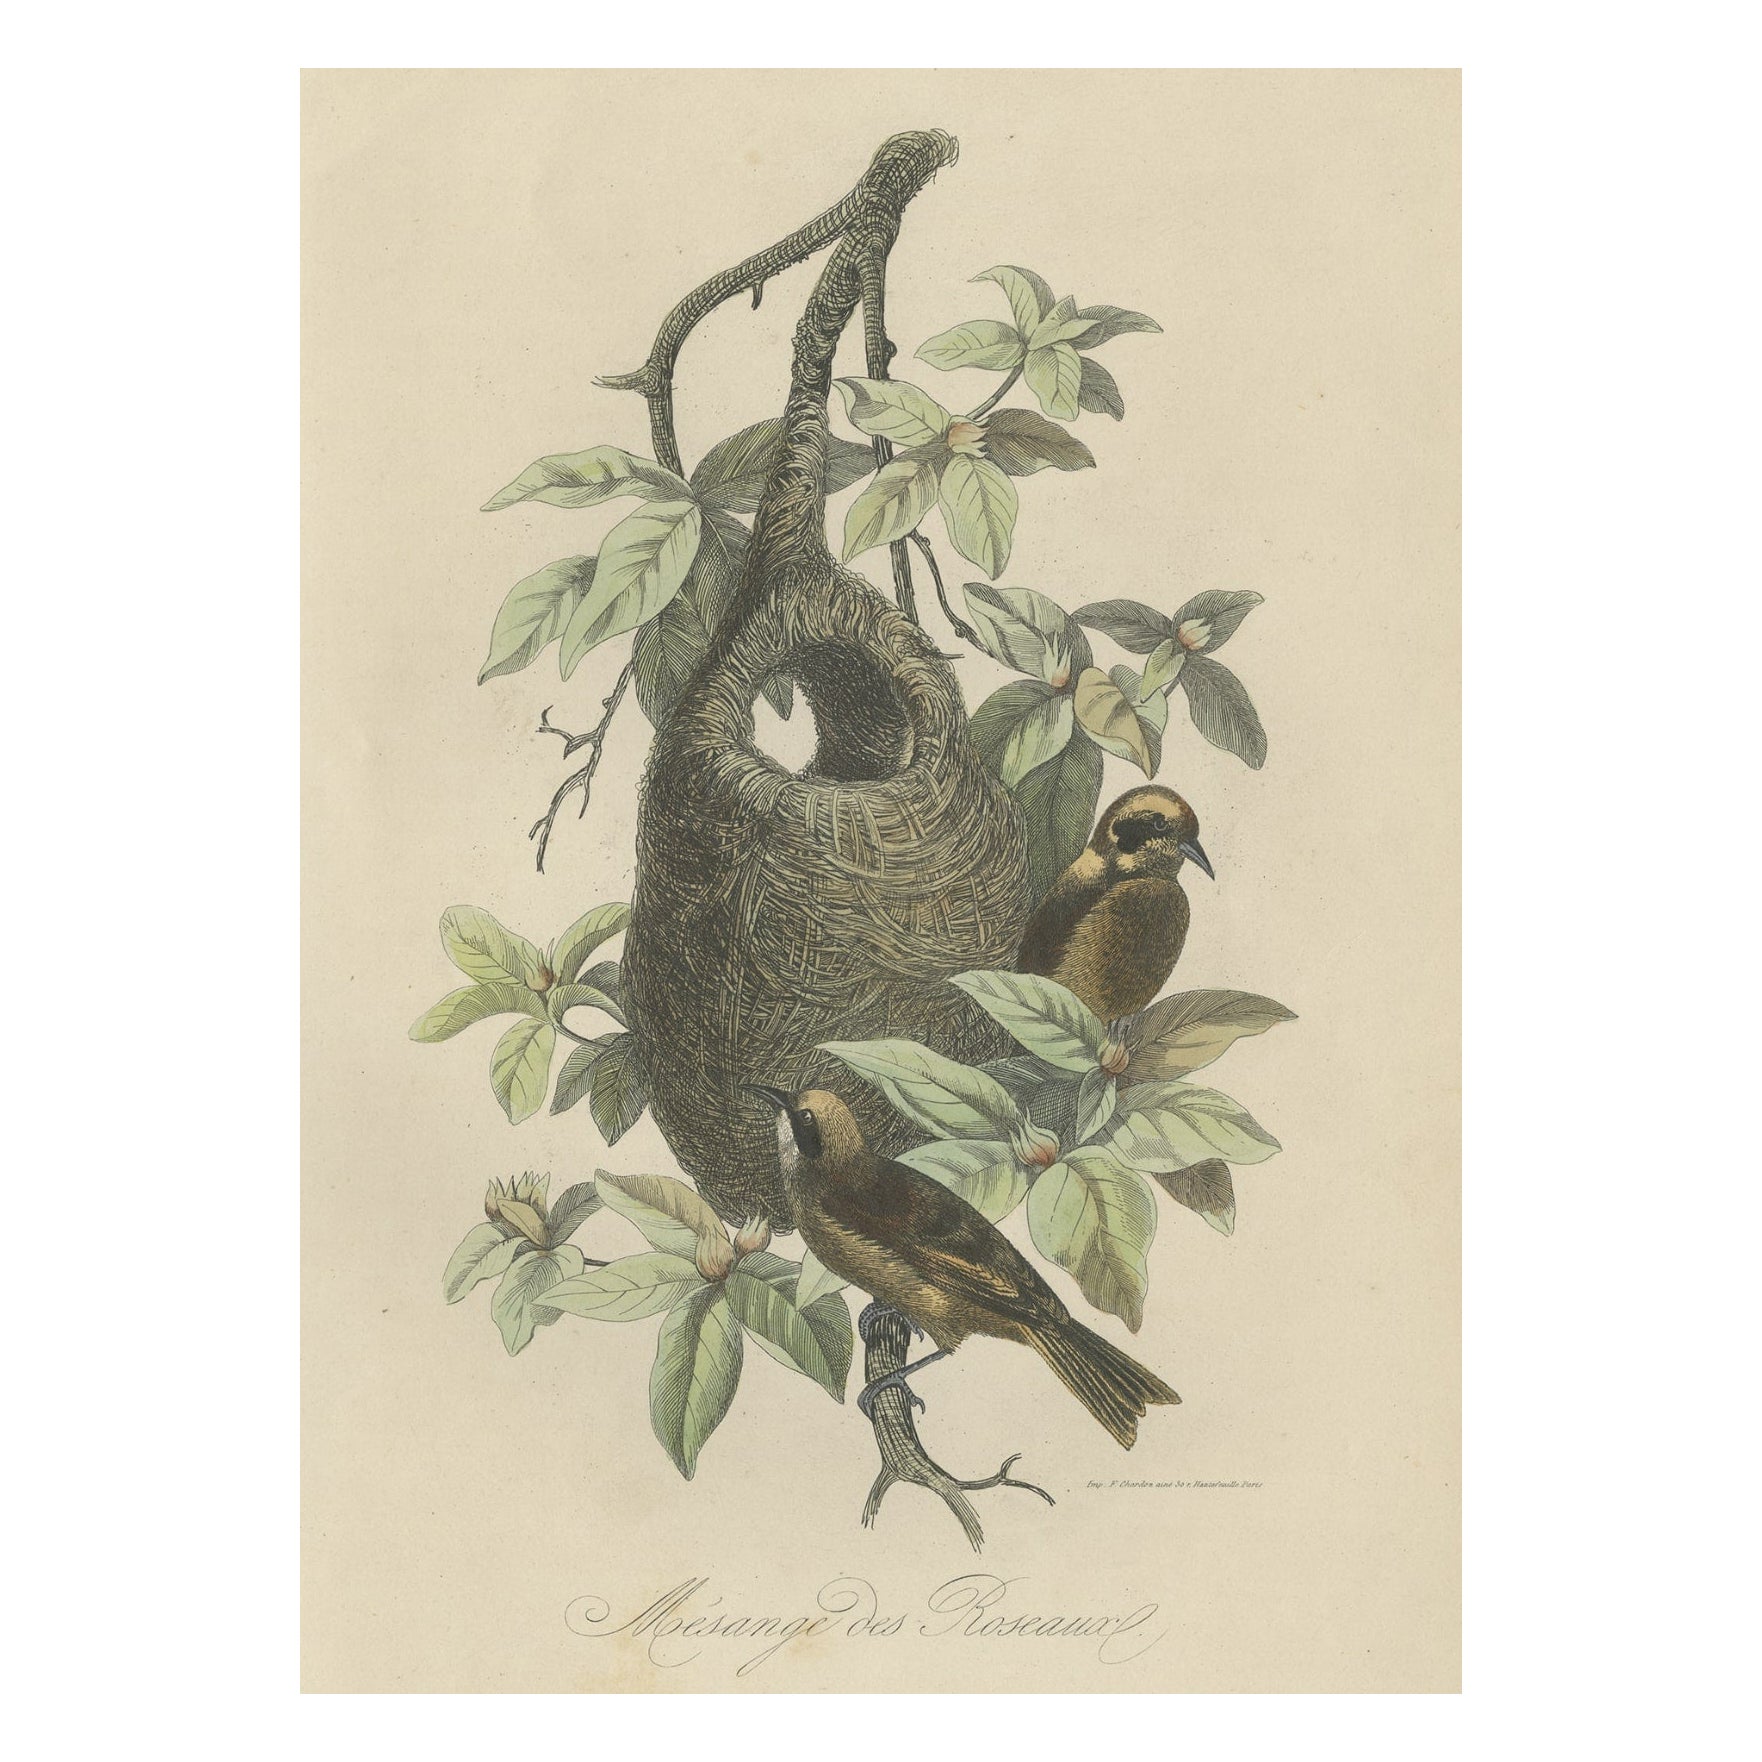 Antique Print of Tit Species with Nest, 1854